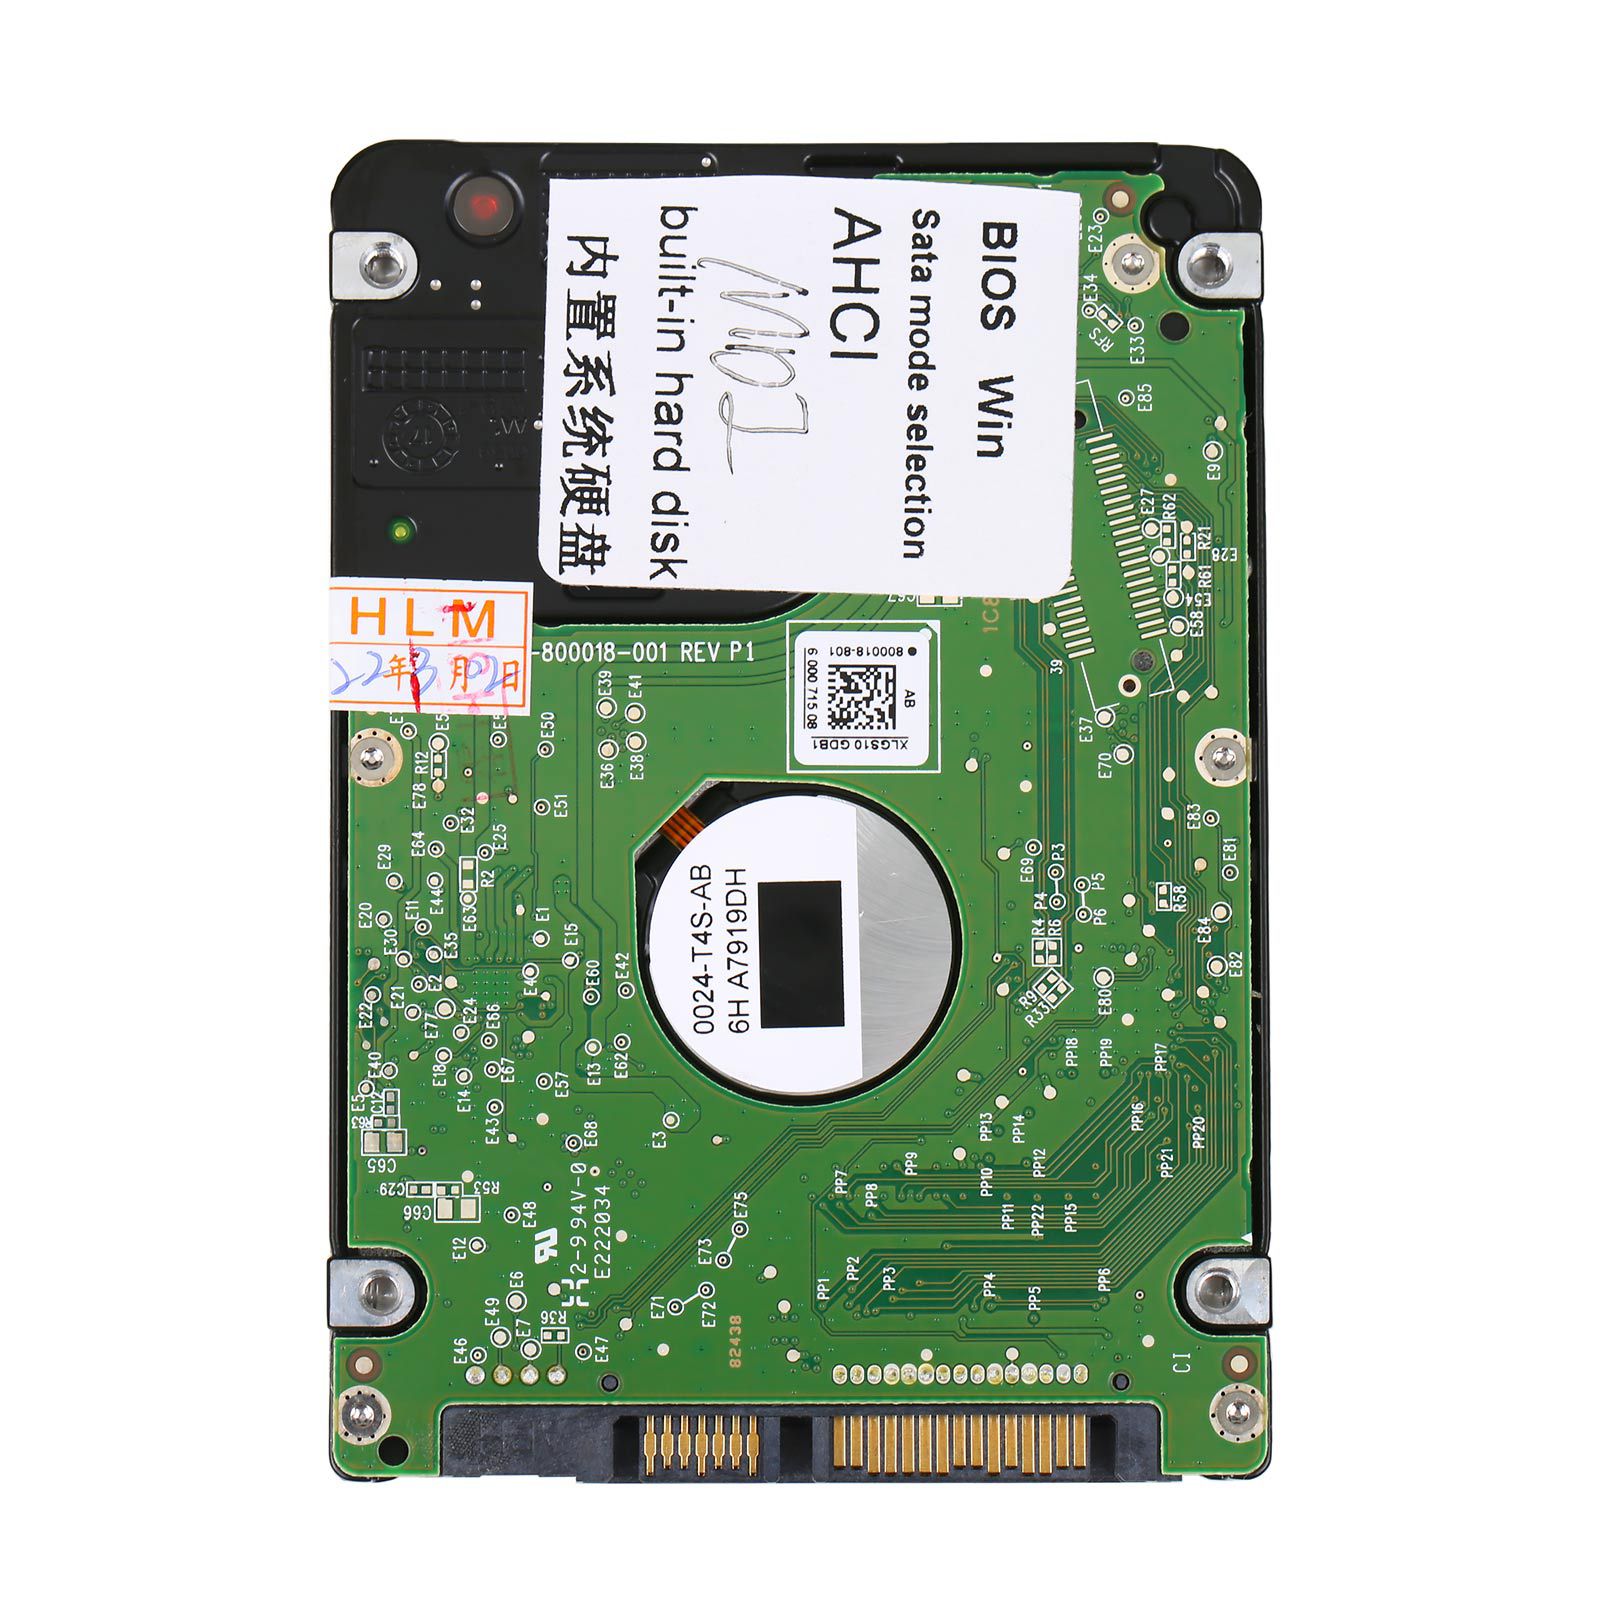 GM MDI GDS2 GM MDI GDS Tech 2 Win Software Sata HDD for Vauxhall Opel/Buick and Chevrolet V8.3.103.39